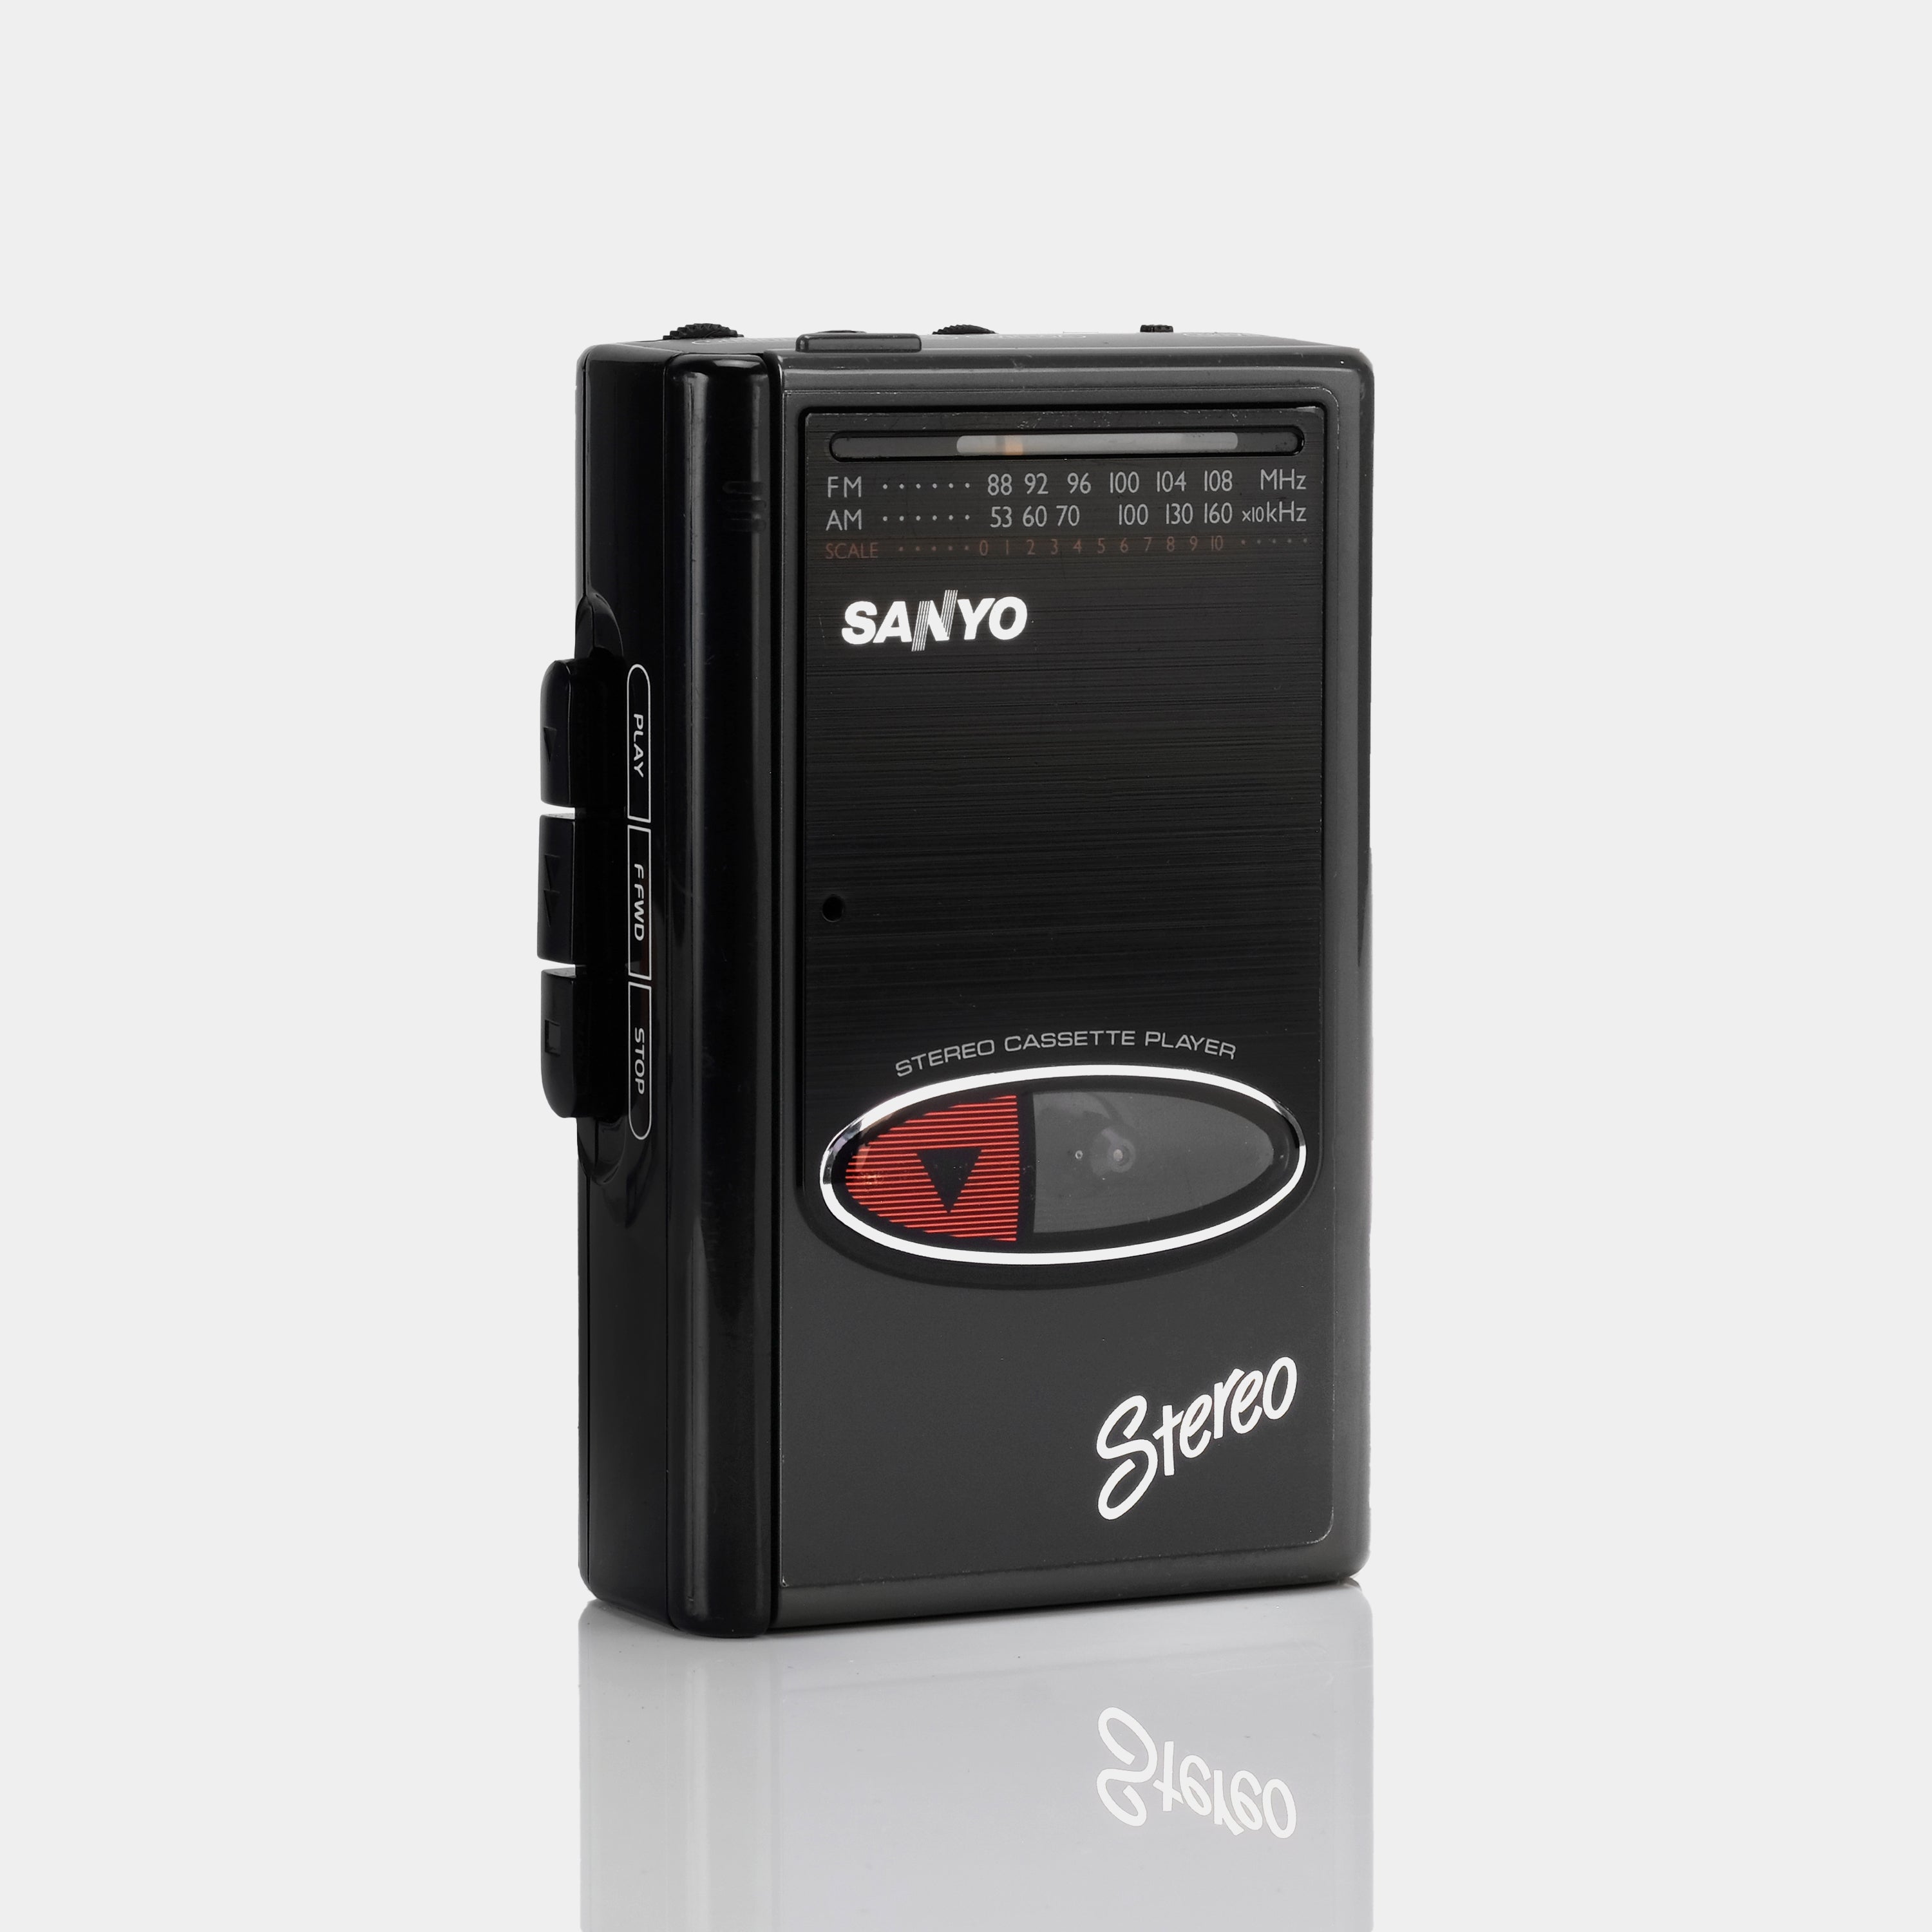 Sanyo MGR63 Stereo AM/FM Portable Cassette Player